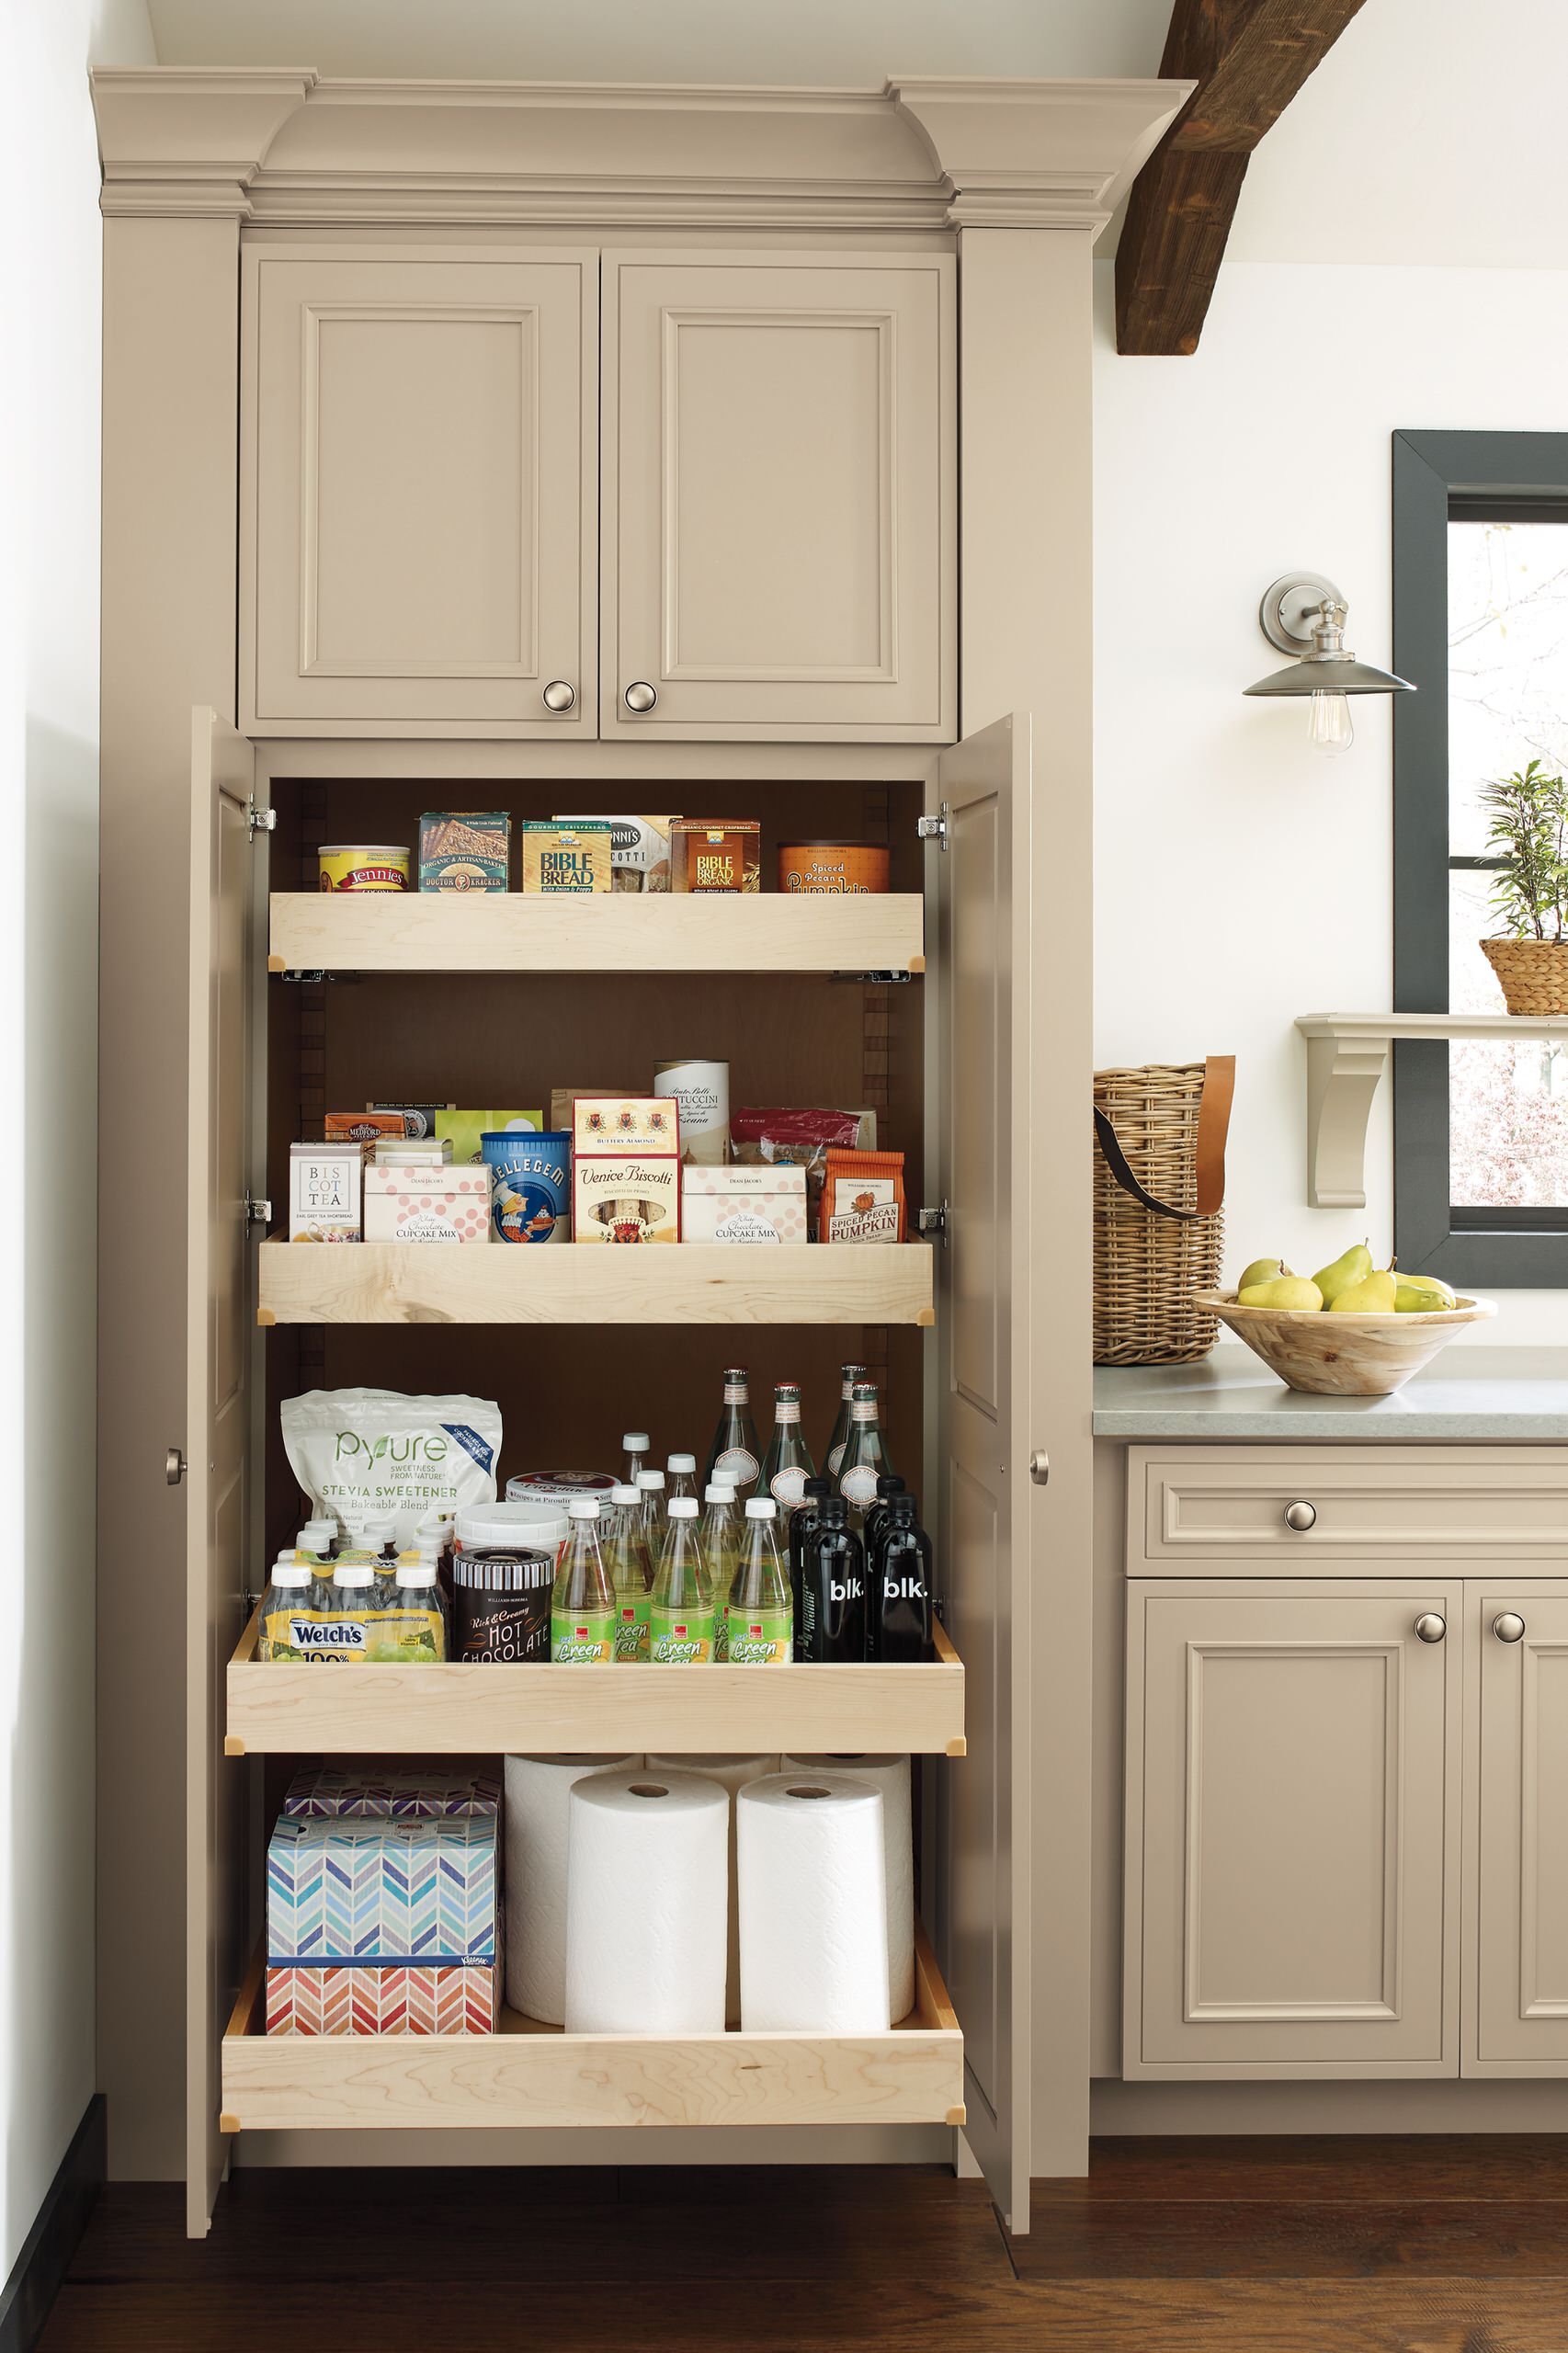 Pantry Kitchen Cabinets at